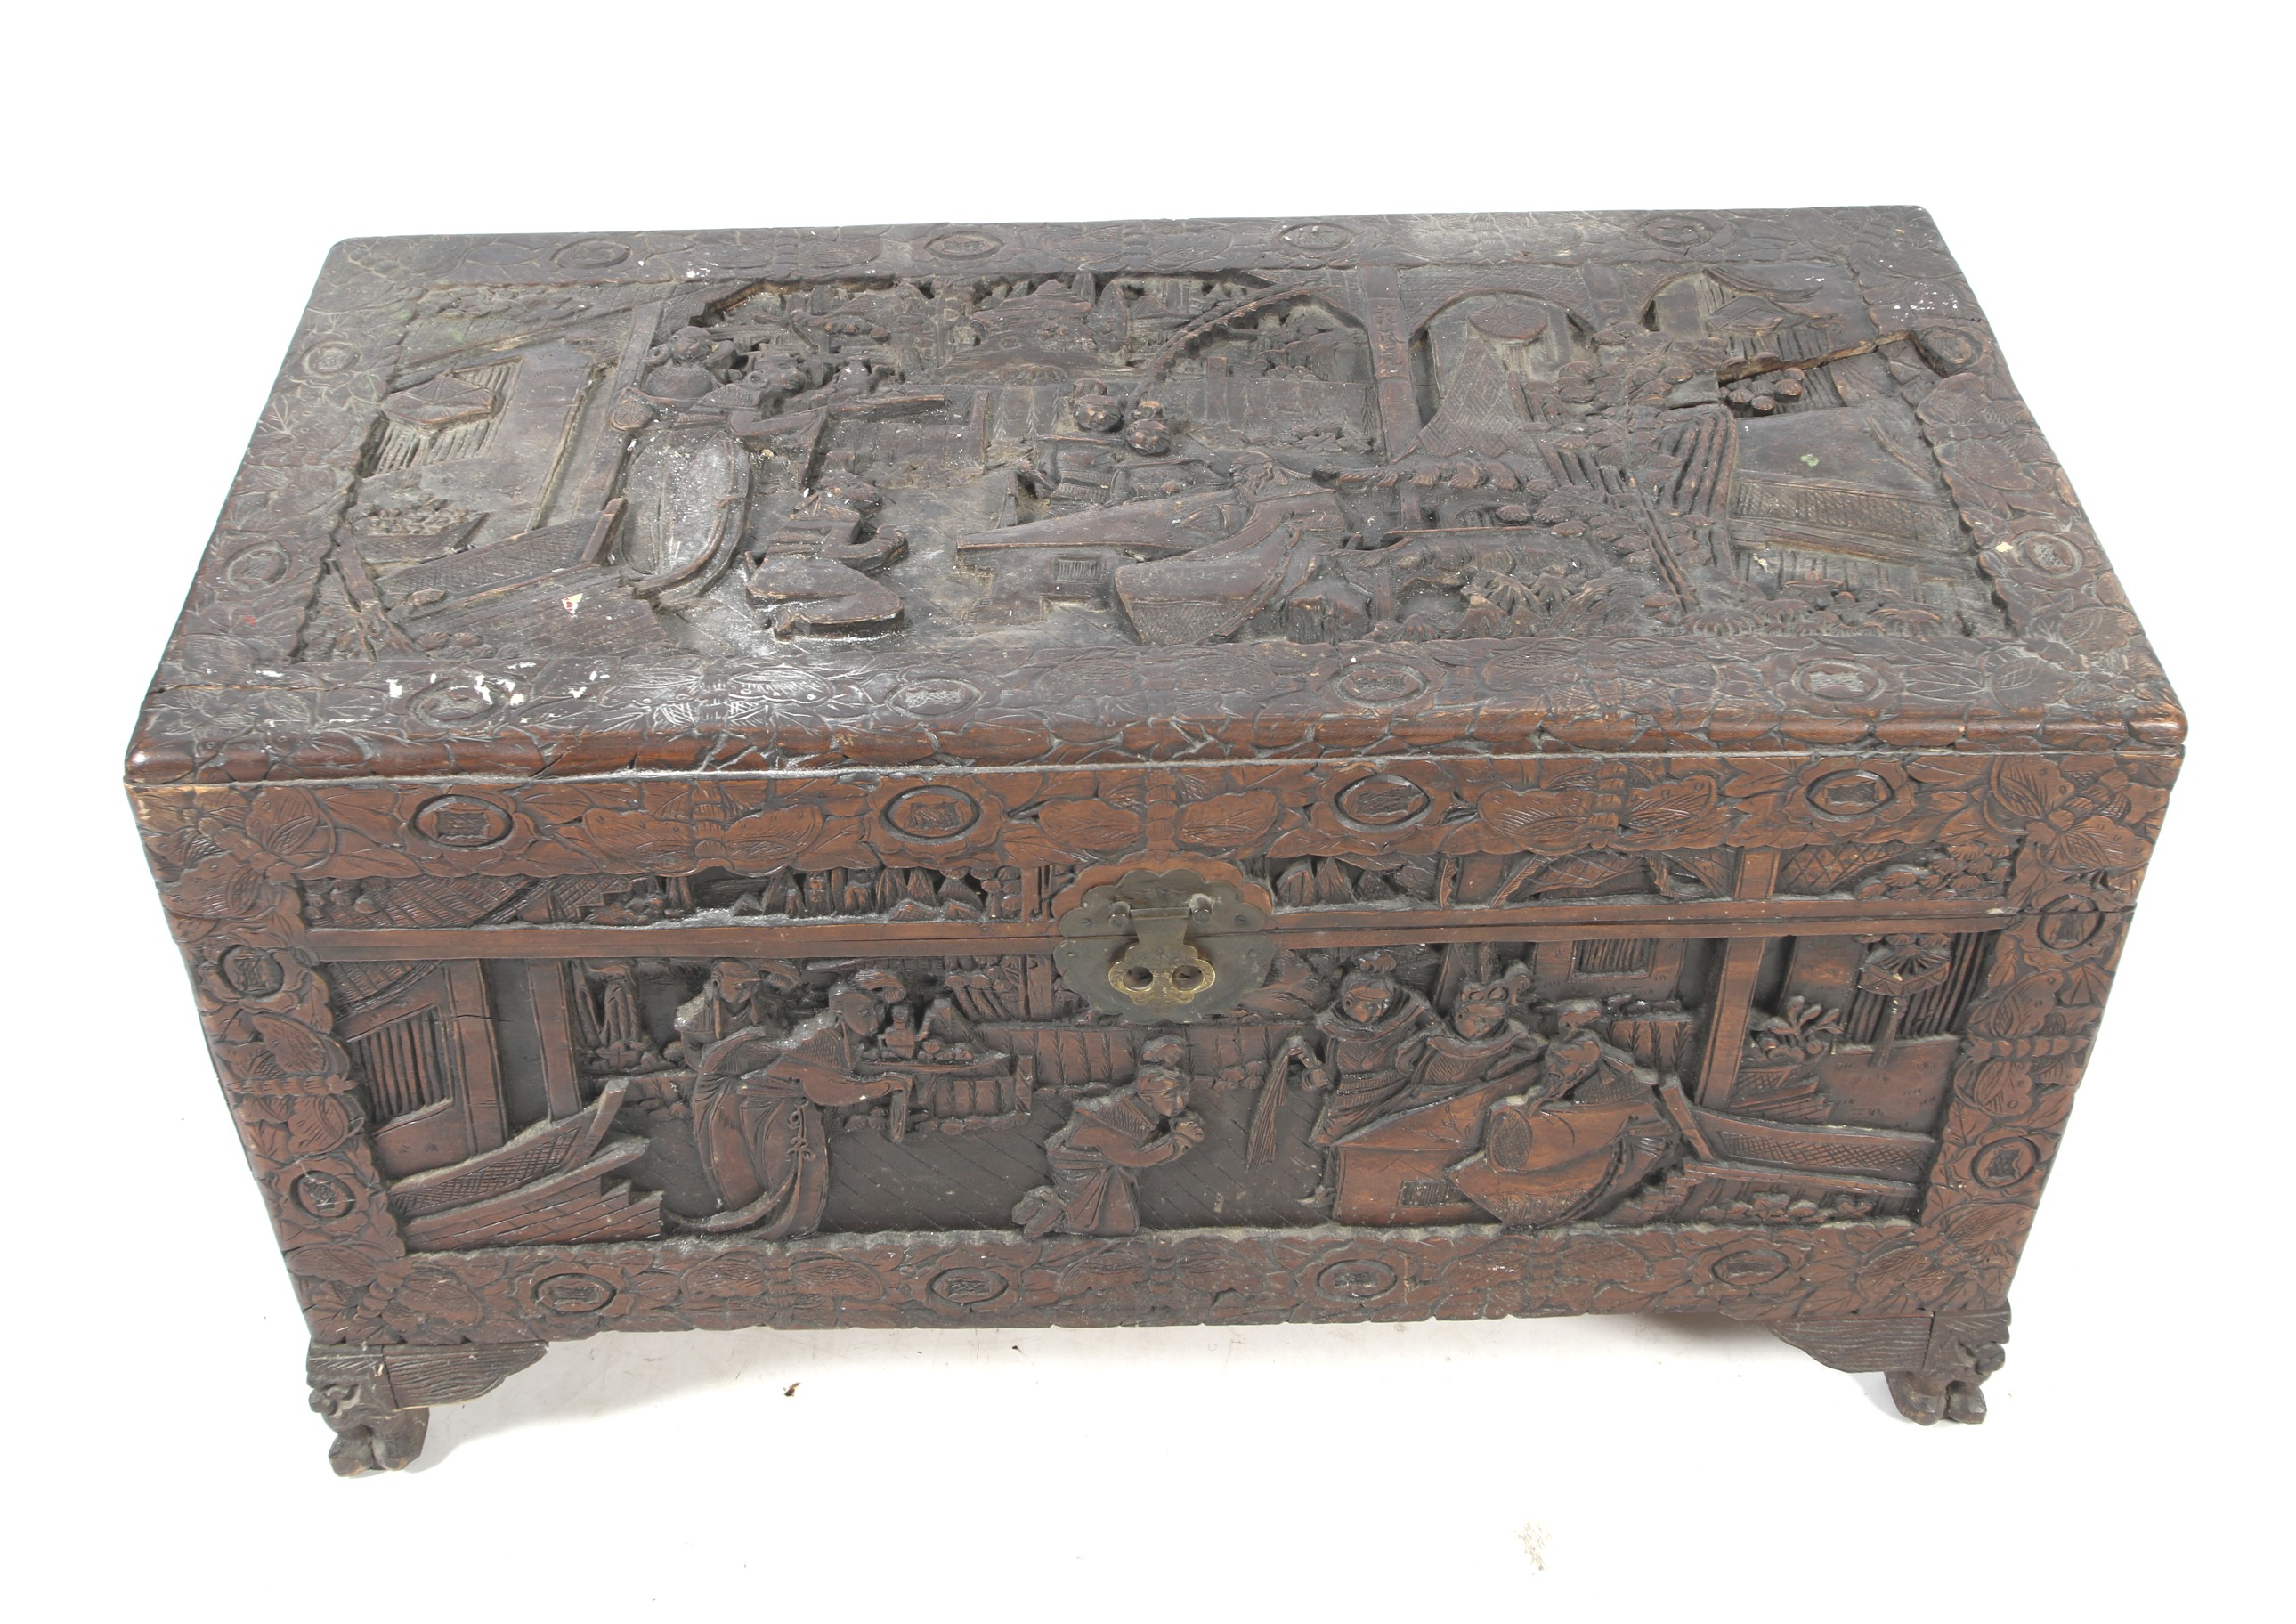 An early 20th century Chinese carved camphor wood chest.